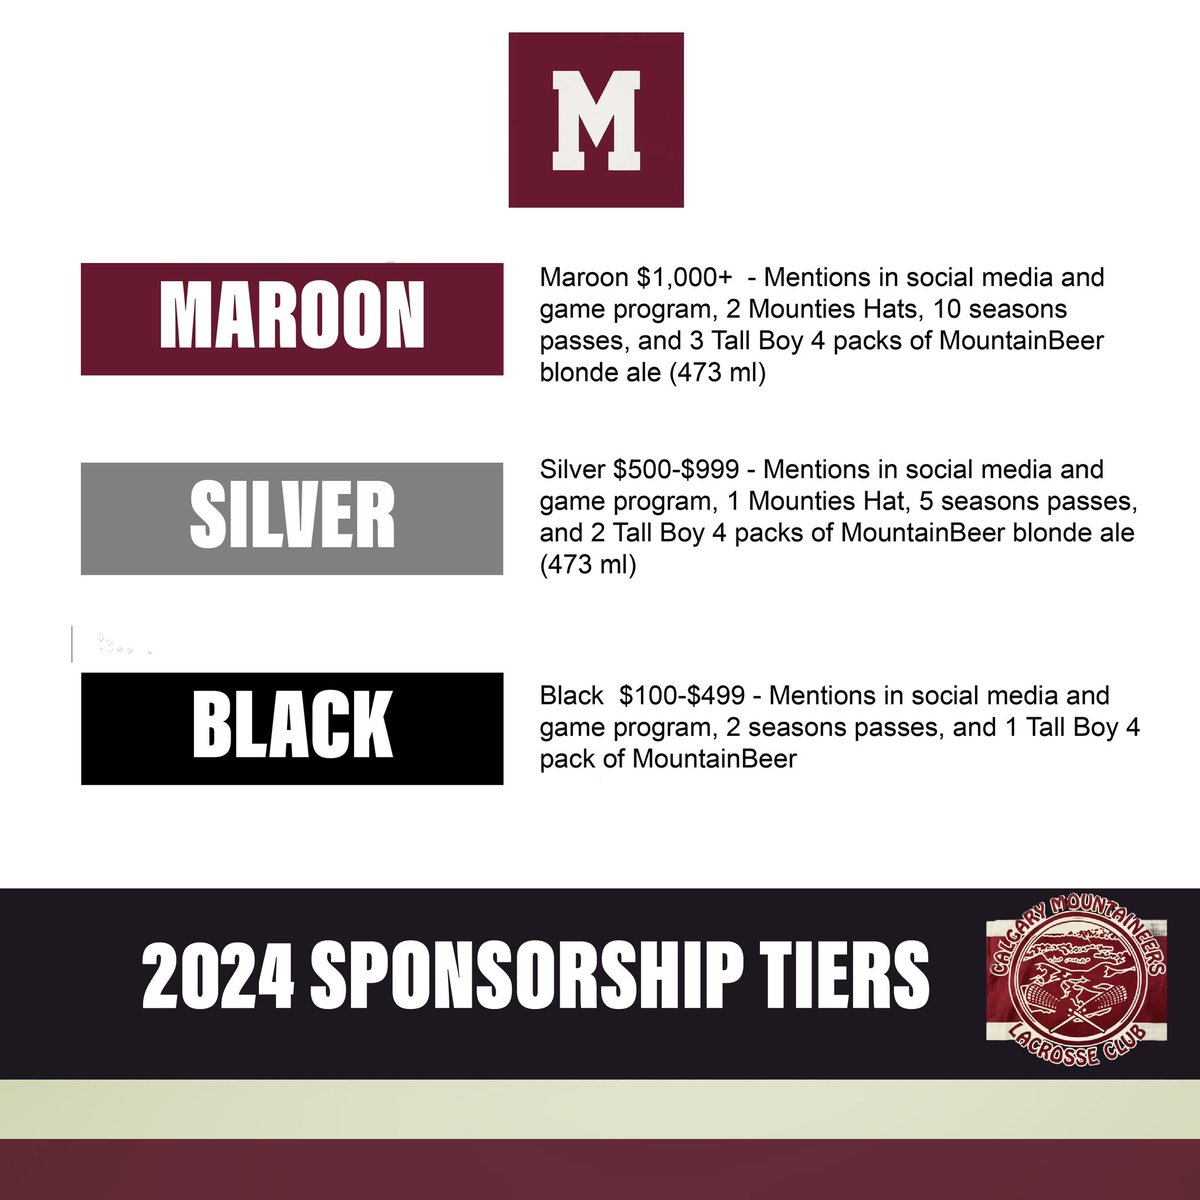 SUPPORT THE MOUNTAINEERS IN 2024

Three sponsorship tiers are now available! 

Partner your company with one of the most followed brands in Junior B Tier 1 lacrosse.

DM us on Insta or email jtyrrell@shaw.ca

#Mountaineerslax #Mountaineersfamily #Mountaineerssponsor